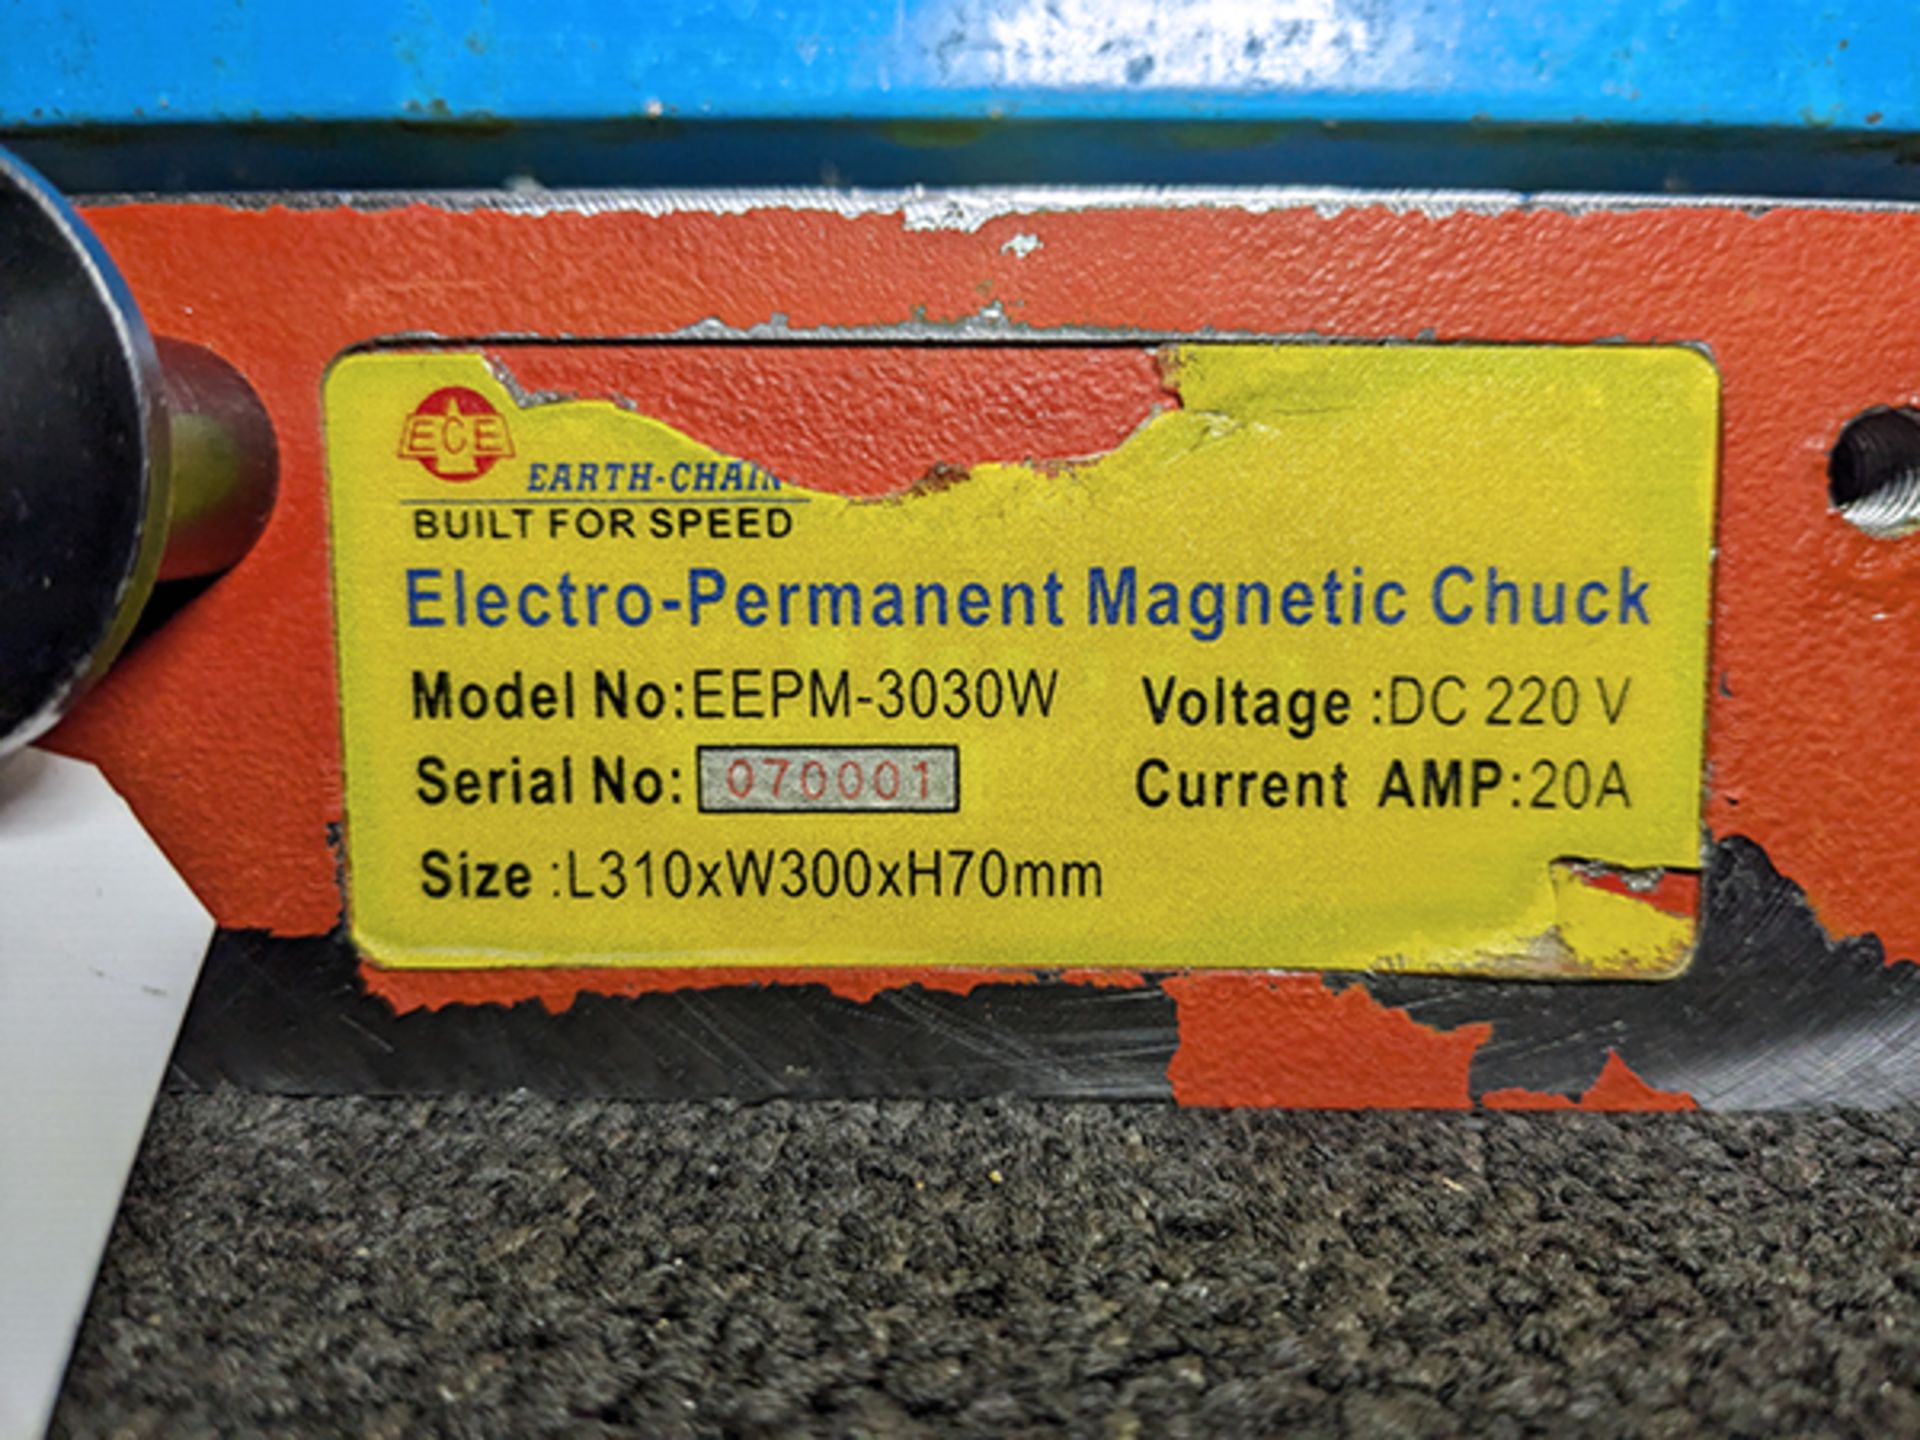 Earth-Chain Electro-Permanent Magnetic Chuck - Image 9 of 9